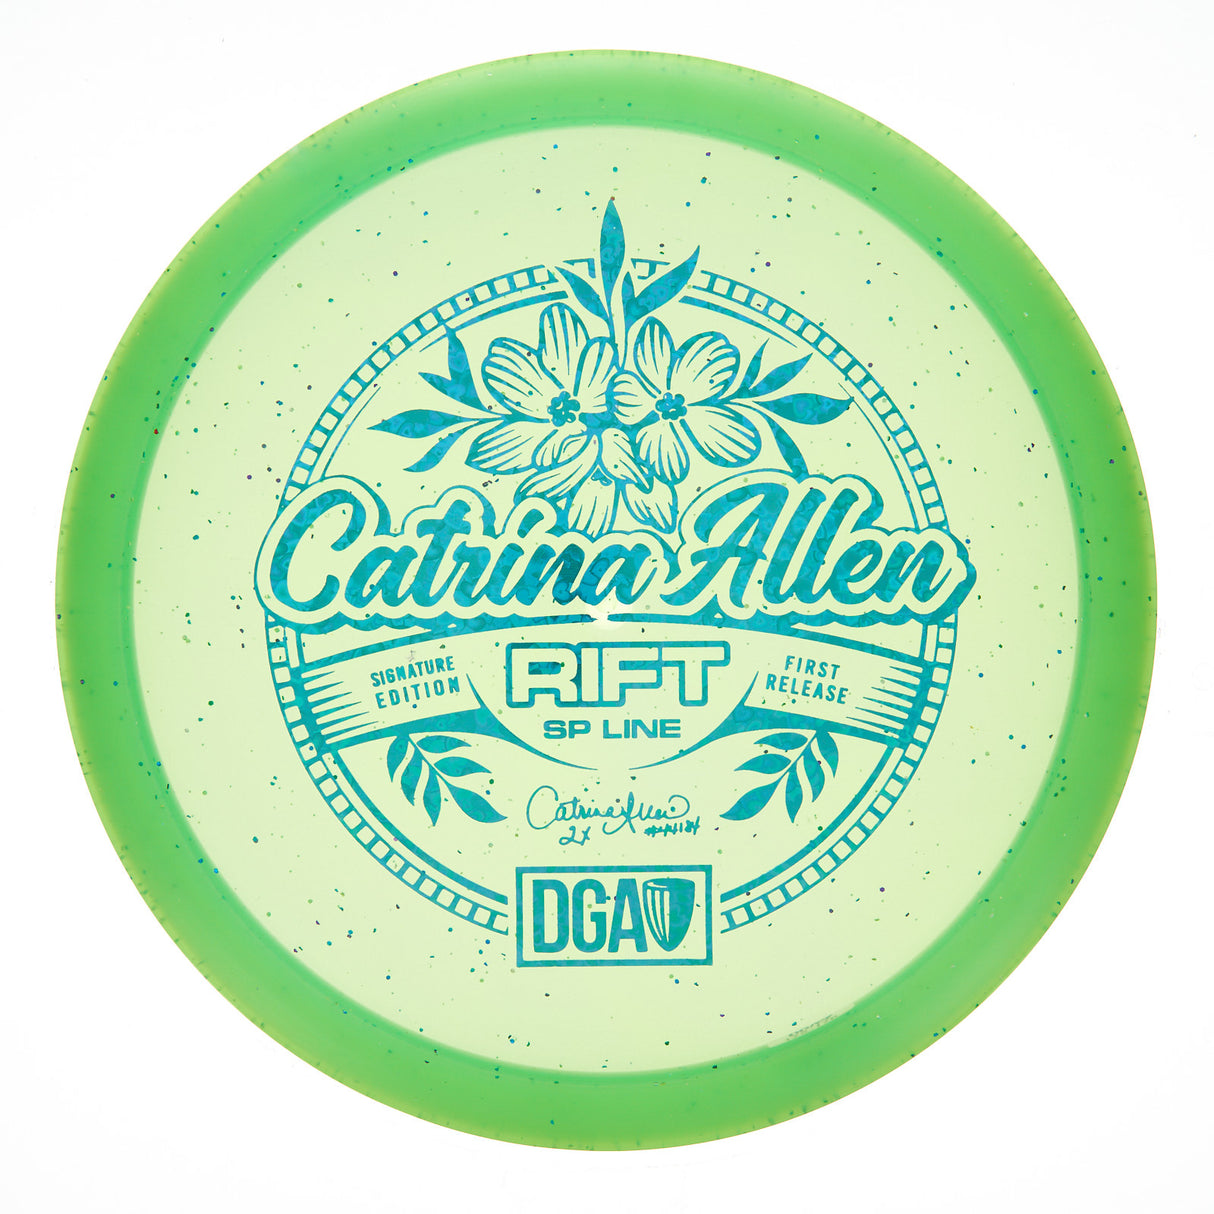 DGA Rift - Catrina Allen Signature Edition First Release SP Line 178g | Style 0001